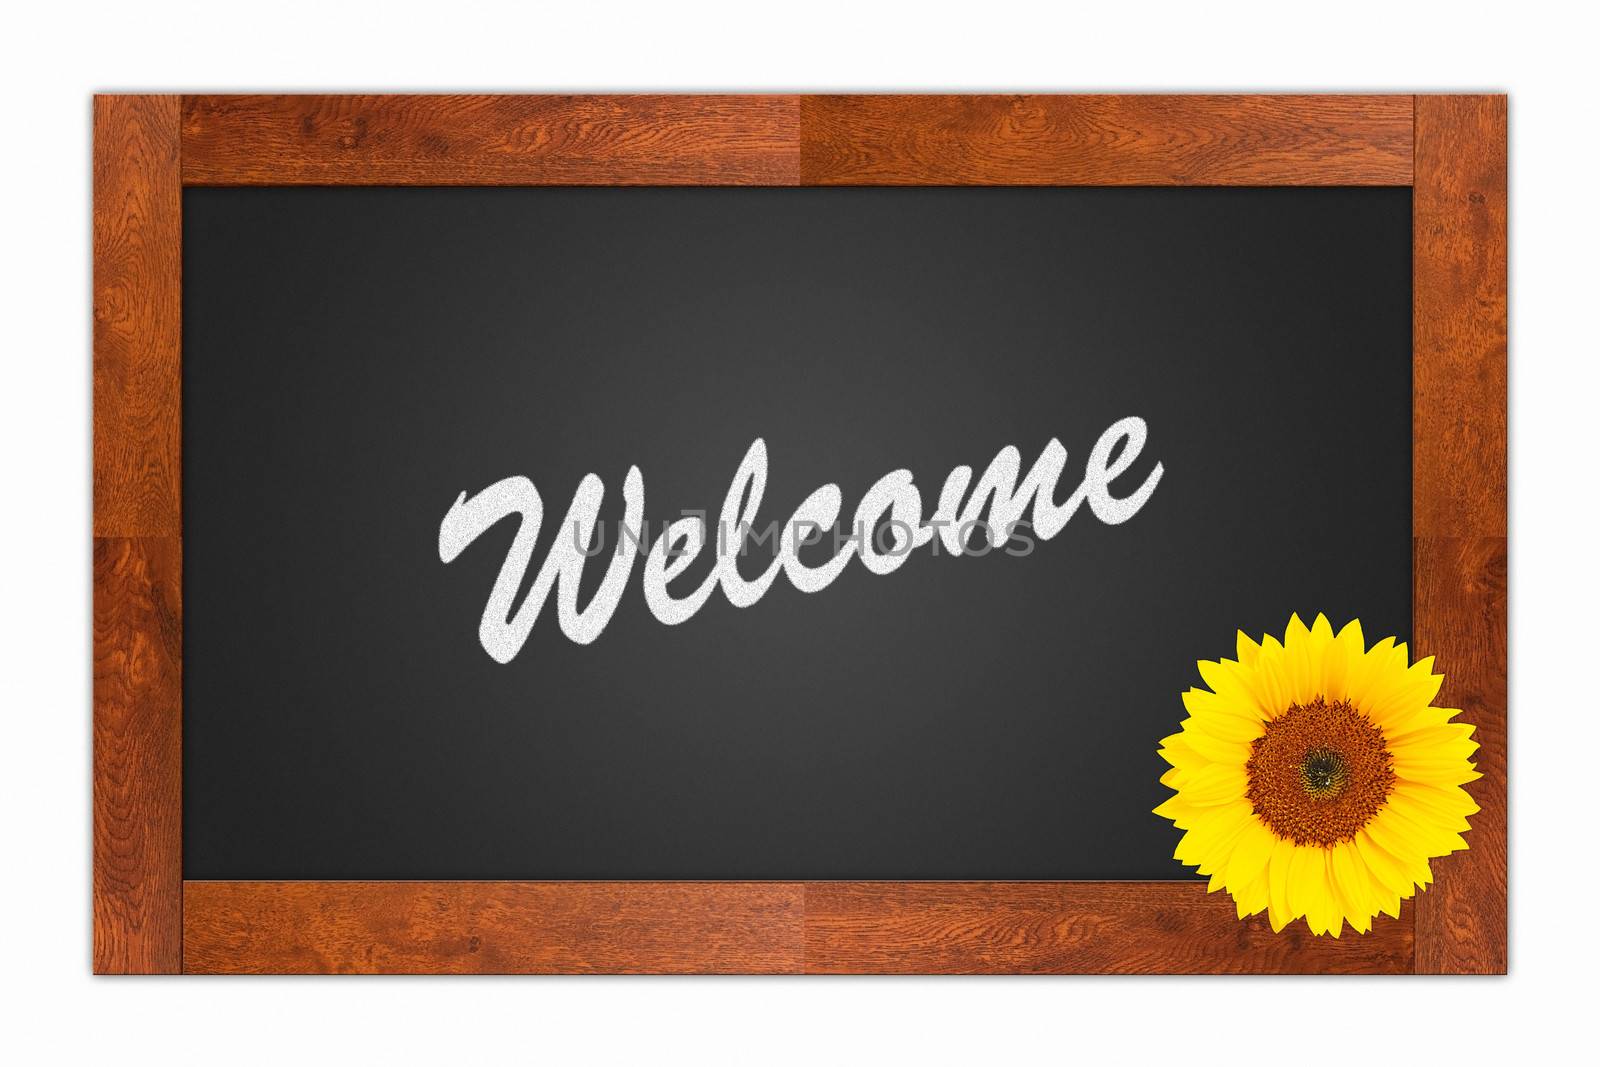 "Welcome" written in chalk on a blank blackboard with sunflower on wooden frame, isolated on white background